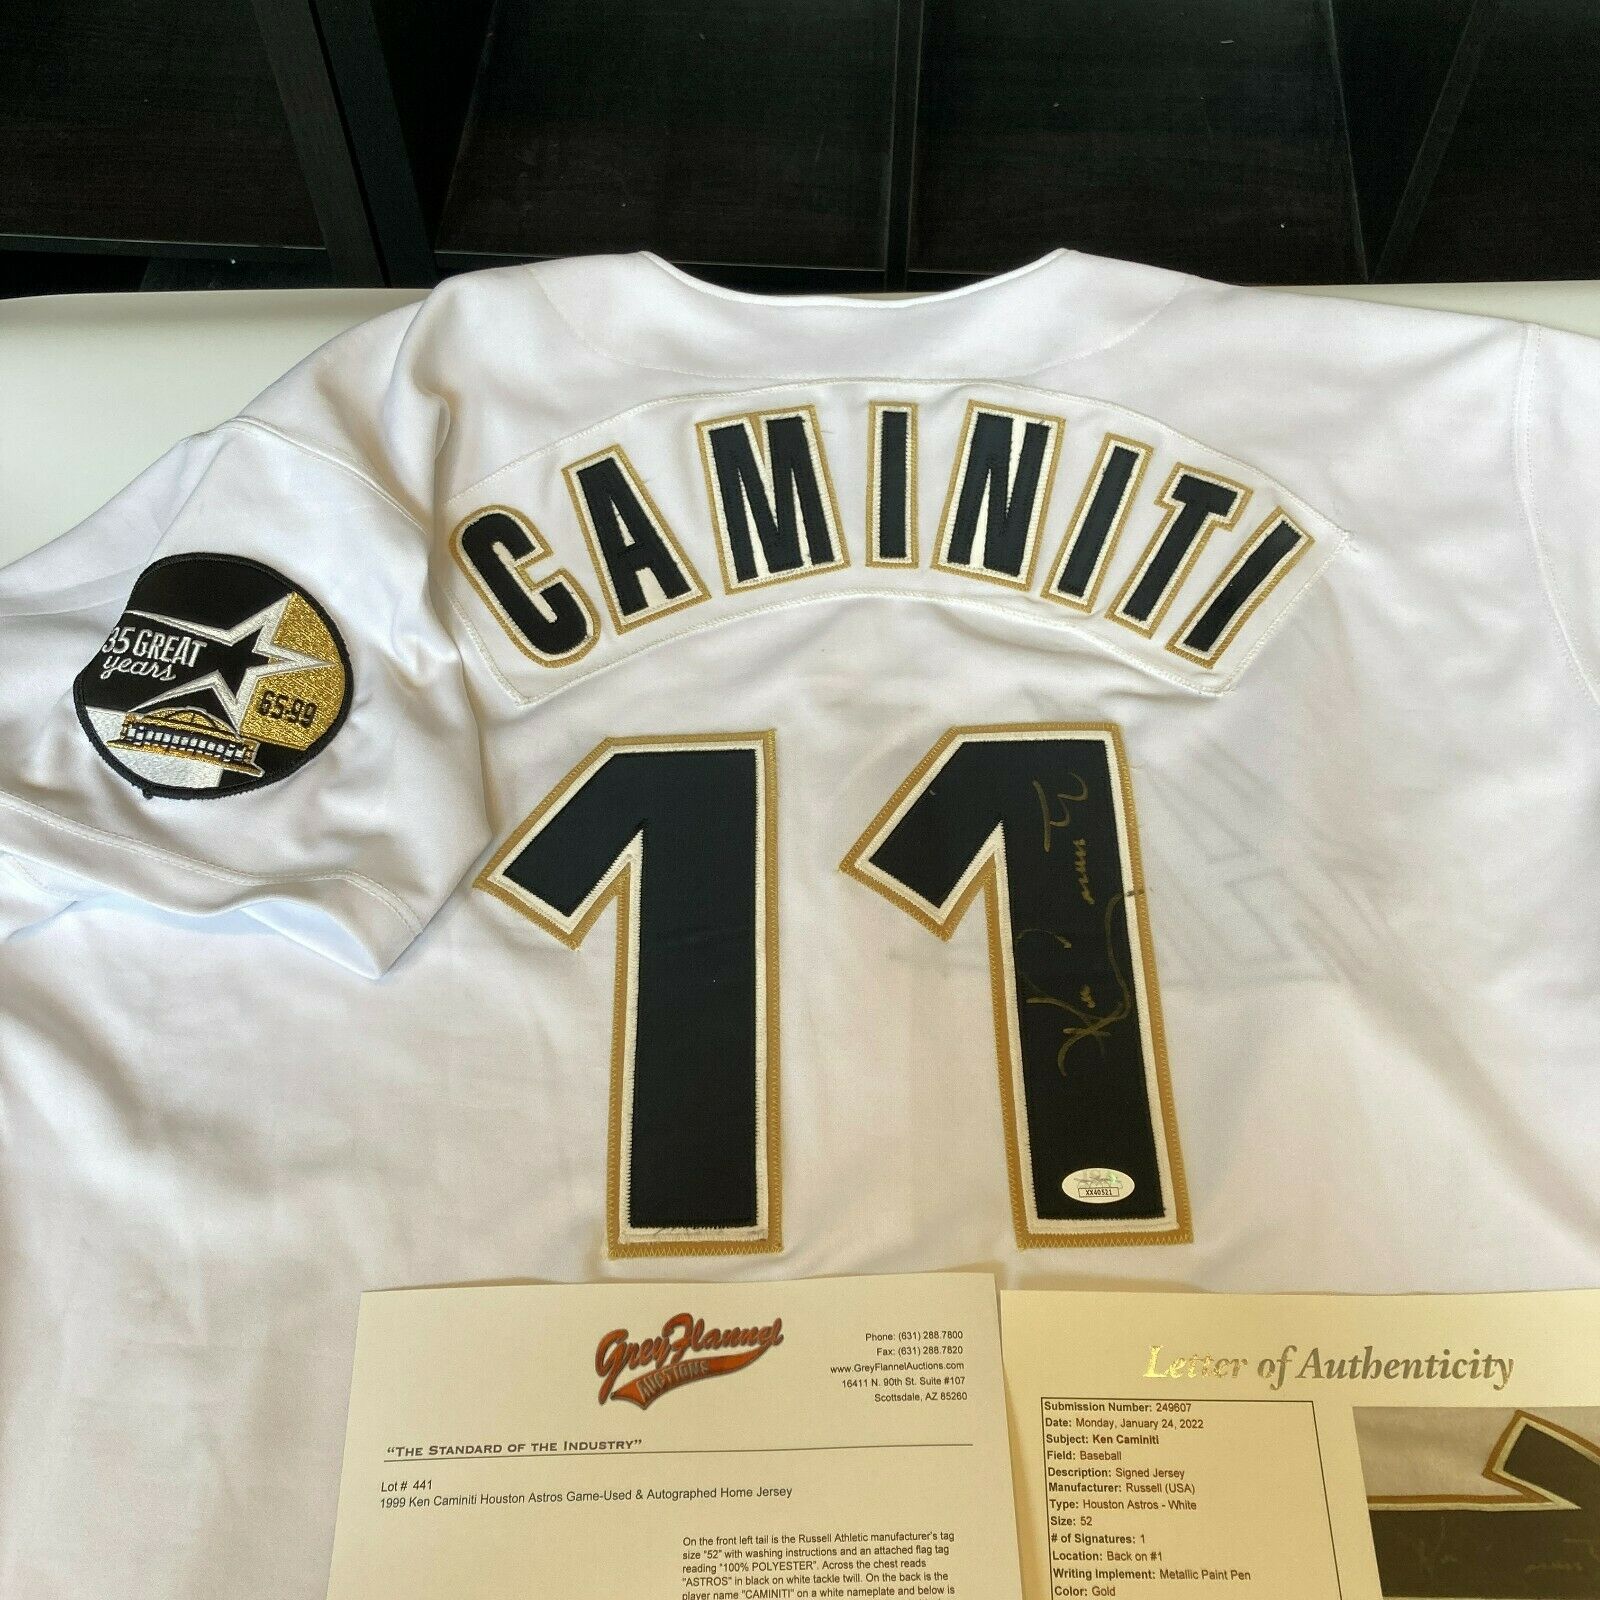 Ken Caminiti Signed Game Used 1999 Houston Astros Jersey With JSA